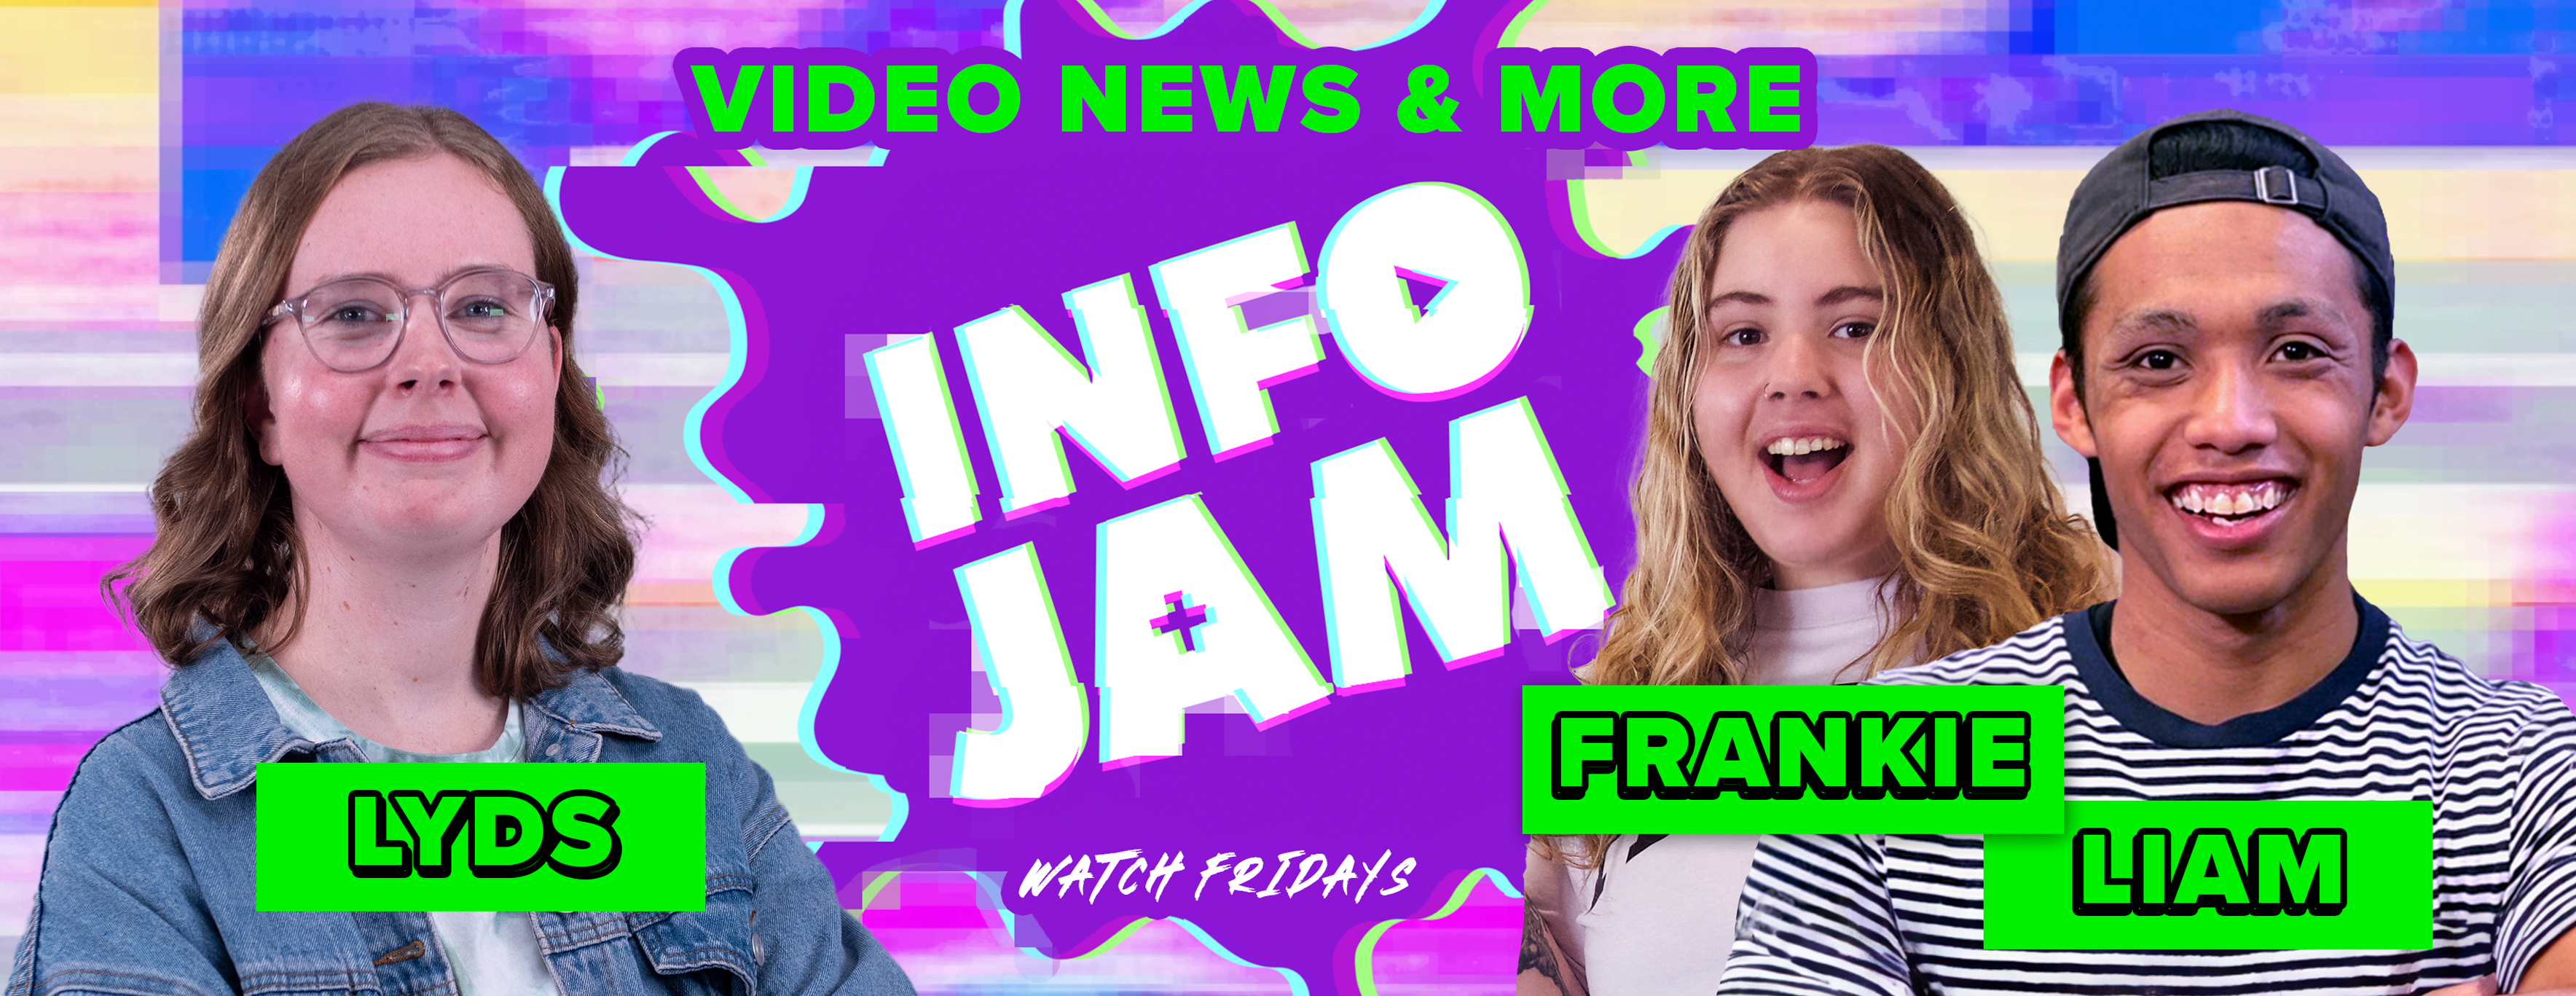 An image banner for a video news show called "INFO JAM". It features a colorful, energetic background with purple hues and abstract shapes. There are three presenters: "LYDS" on the left, a woman with glasses and a denim jacket; "FRANKIE" in the center, a smiling woman with curly hair and a white shirt; and "LIAM" on the right, a man wearing a striped shirt and a cap, smiling at the camera. All three have their names in bold green rectangles beneath them. The text "VIDEO NEWS & MORE" is prominent at the top, with "WATCH FRIDAYS" in a speech bubble at the bottom. The overall vibe is youthful and lively, suggesting an engaging and fun news program targeted at a young audience.